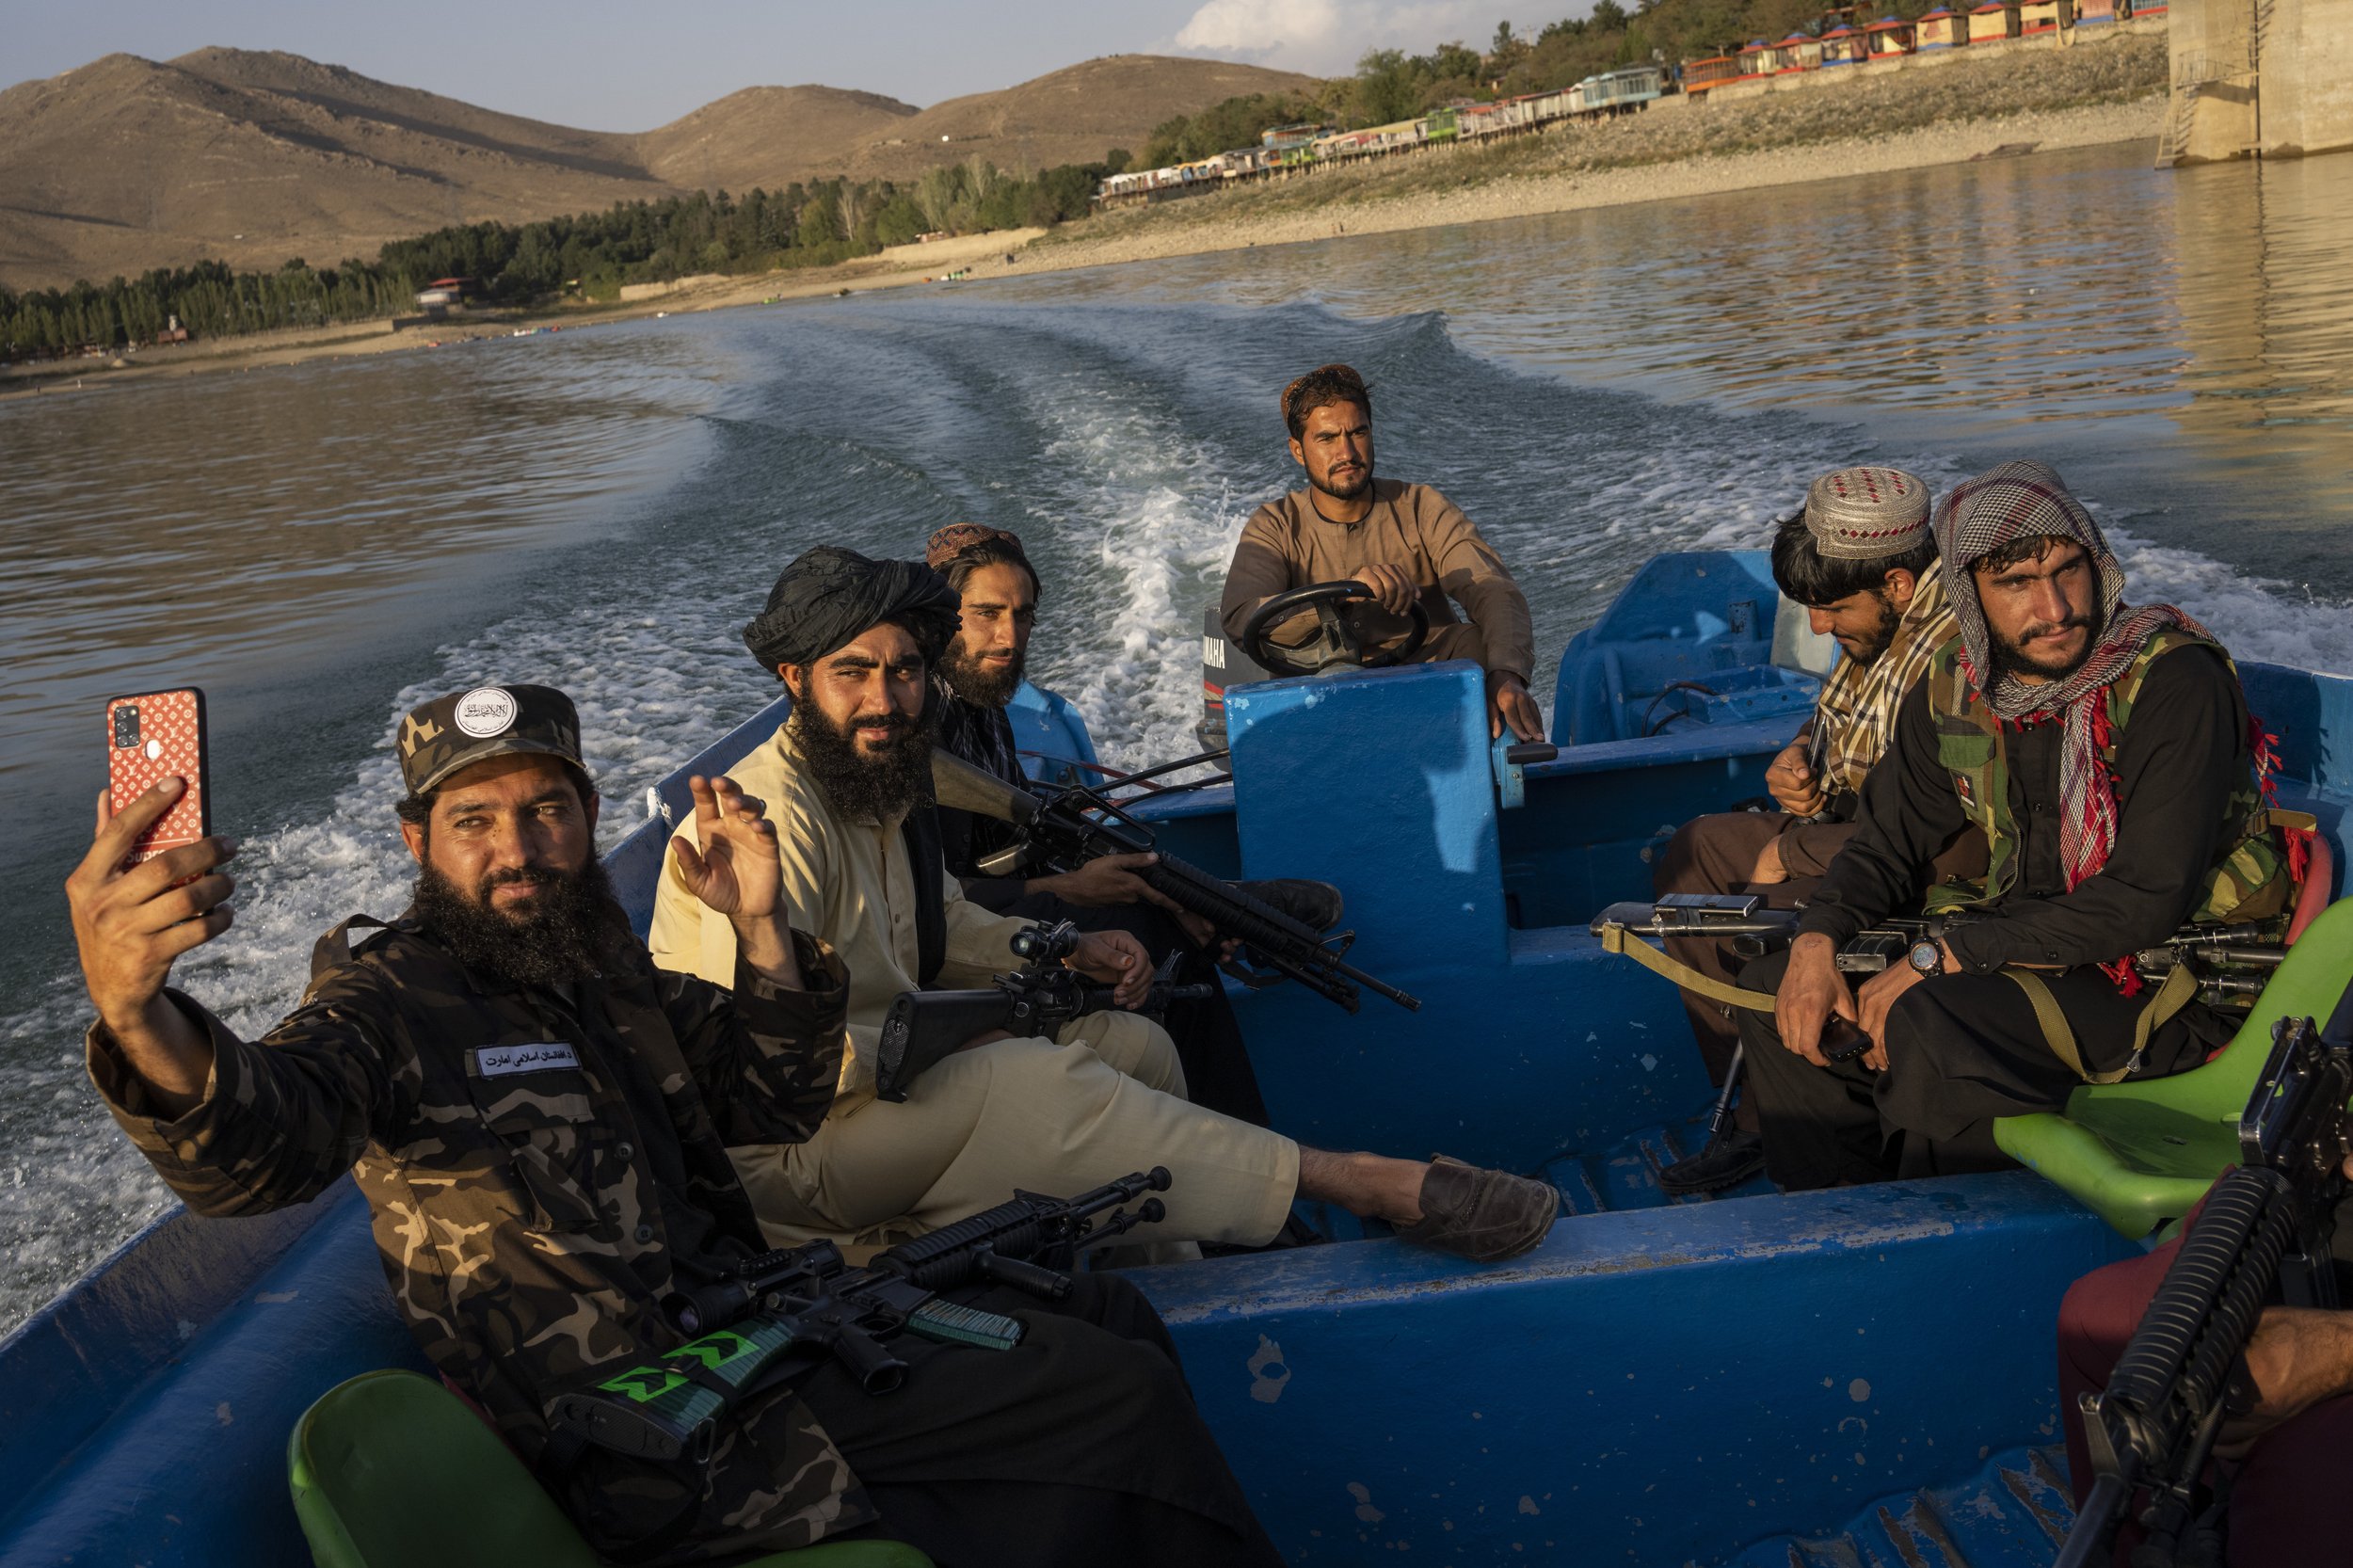  Taliban fighters ride in a boat in the Qargha dam outside Kabul, Afghanistan, on Sept. 24, 2021. (AP Photo/Bernat Armangue) 